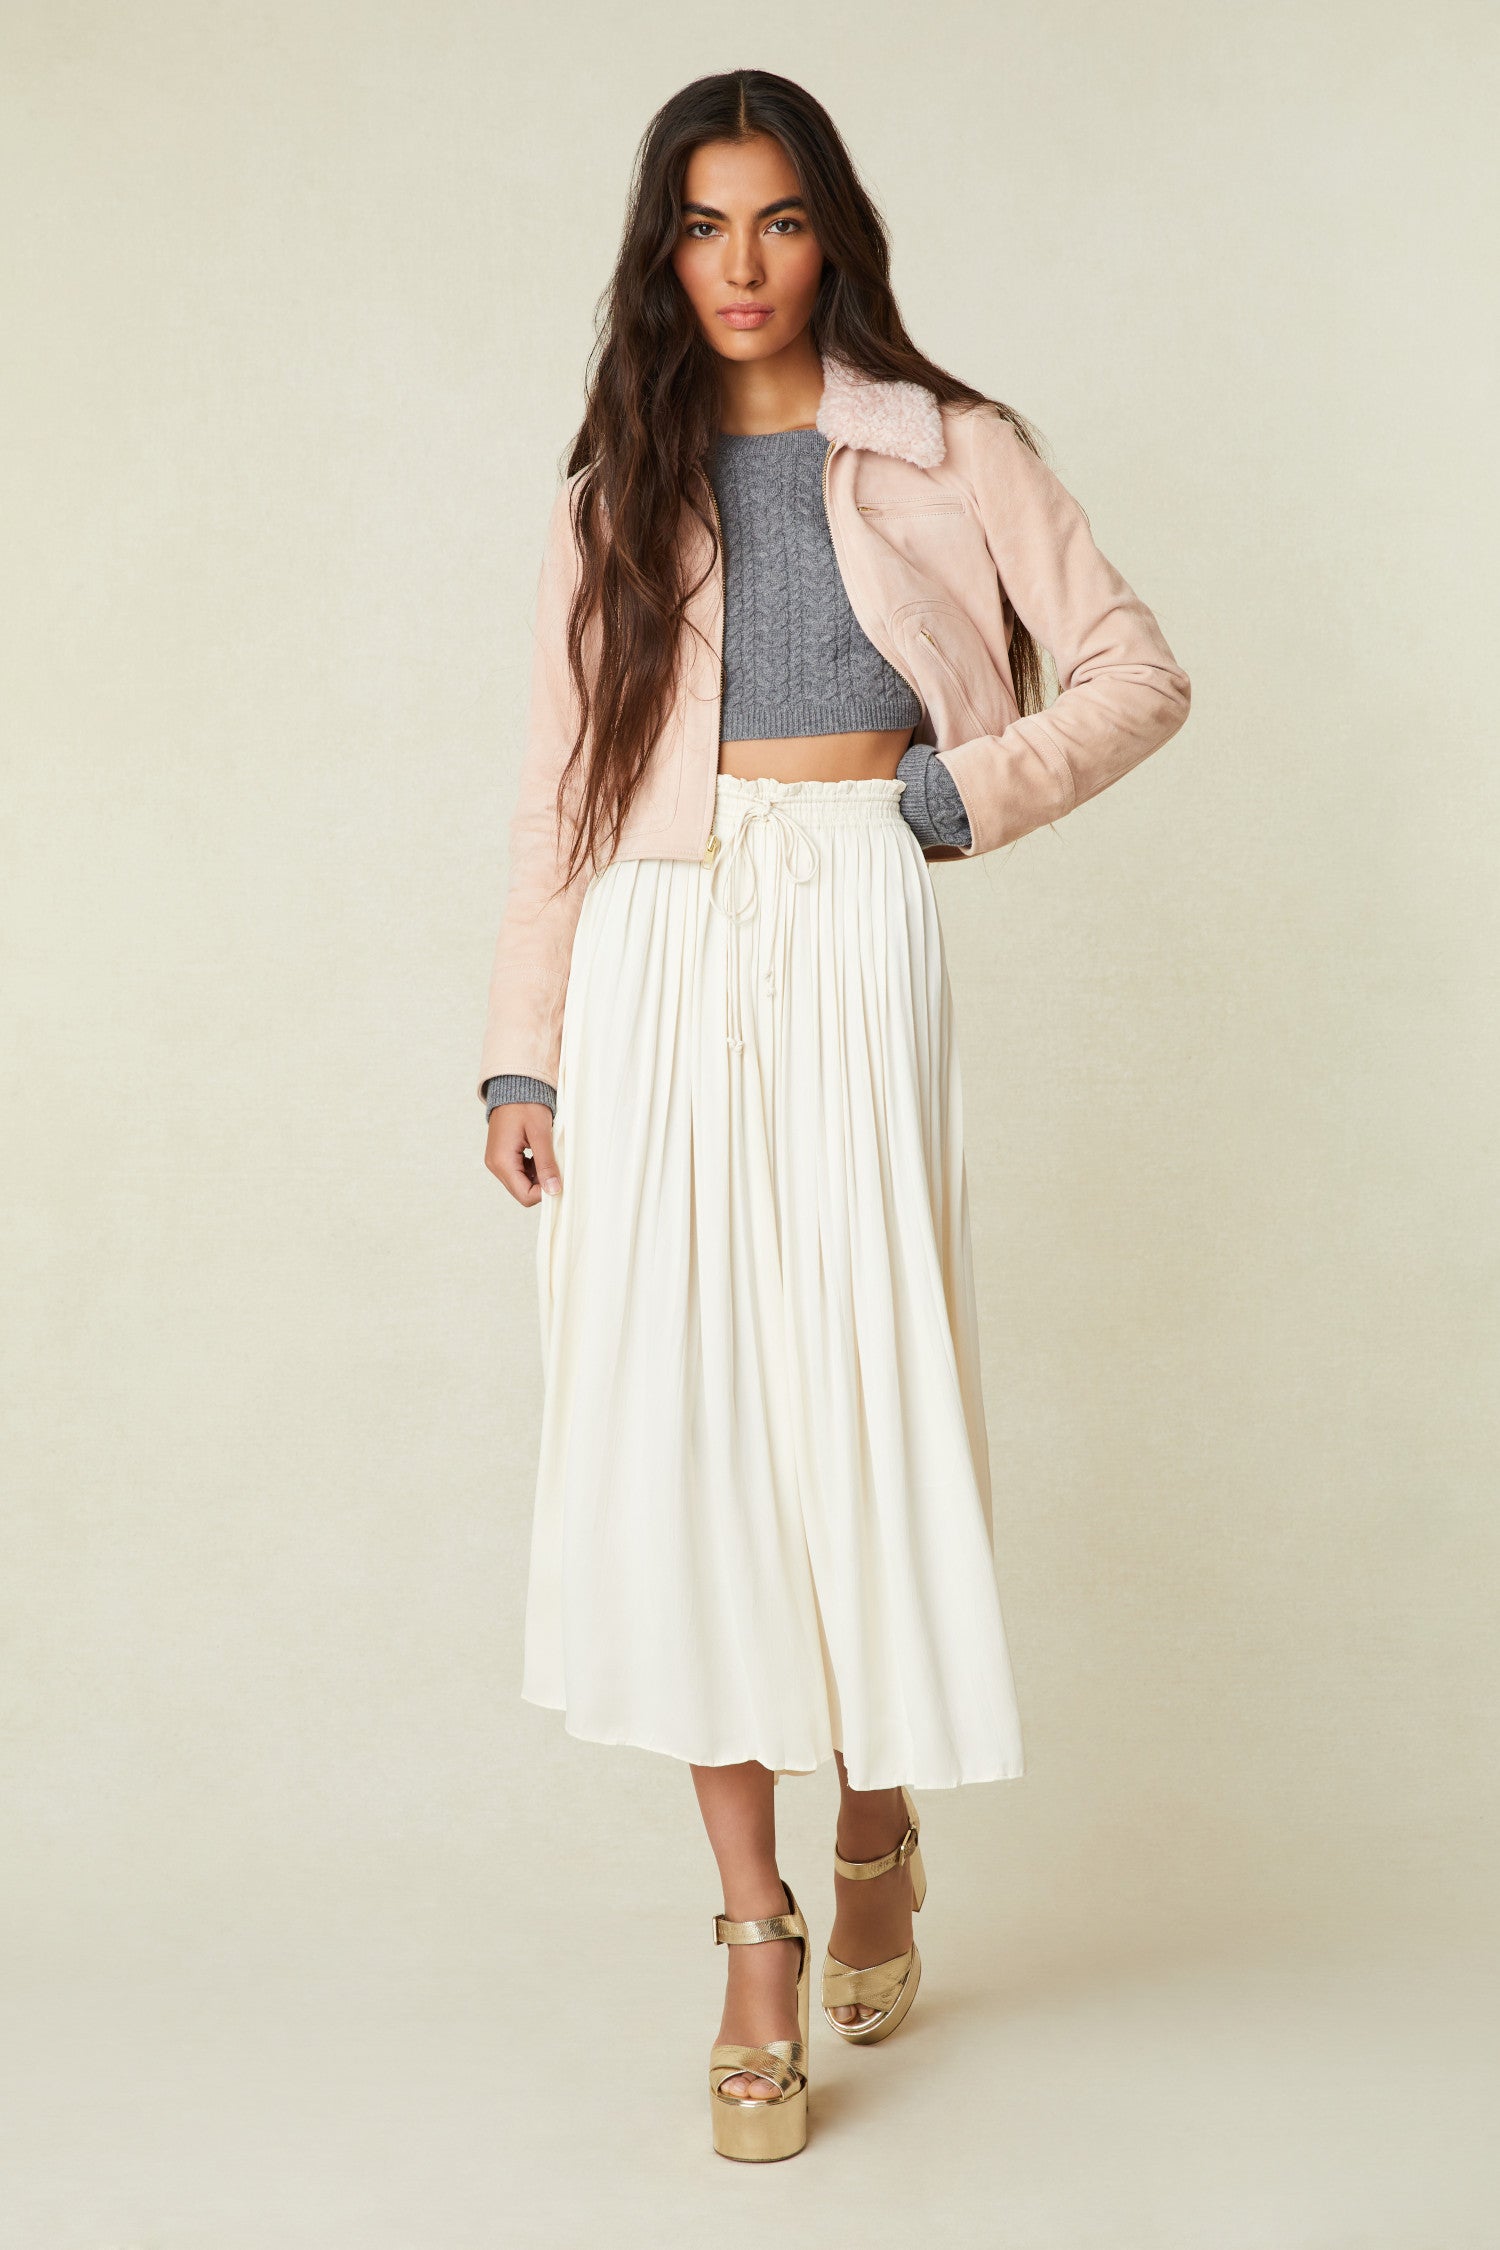 White midi skirt features vertical pleats that fade out at the hem, a drawstring tie at the front and the waist has elastic.